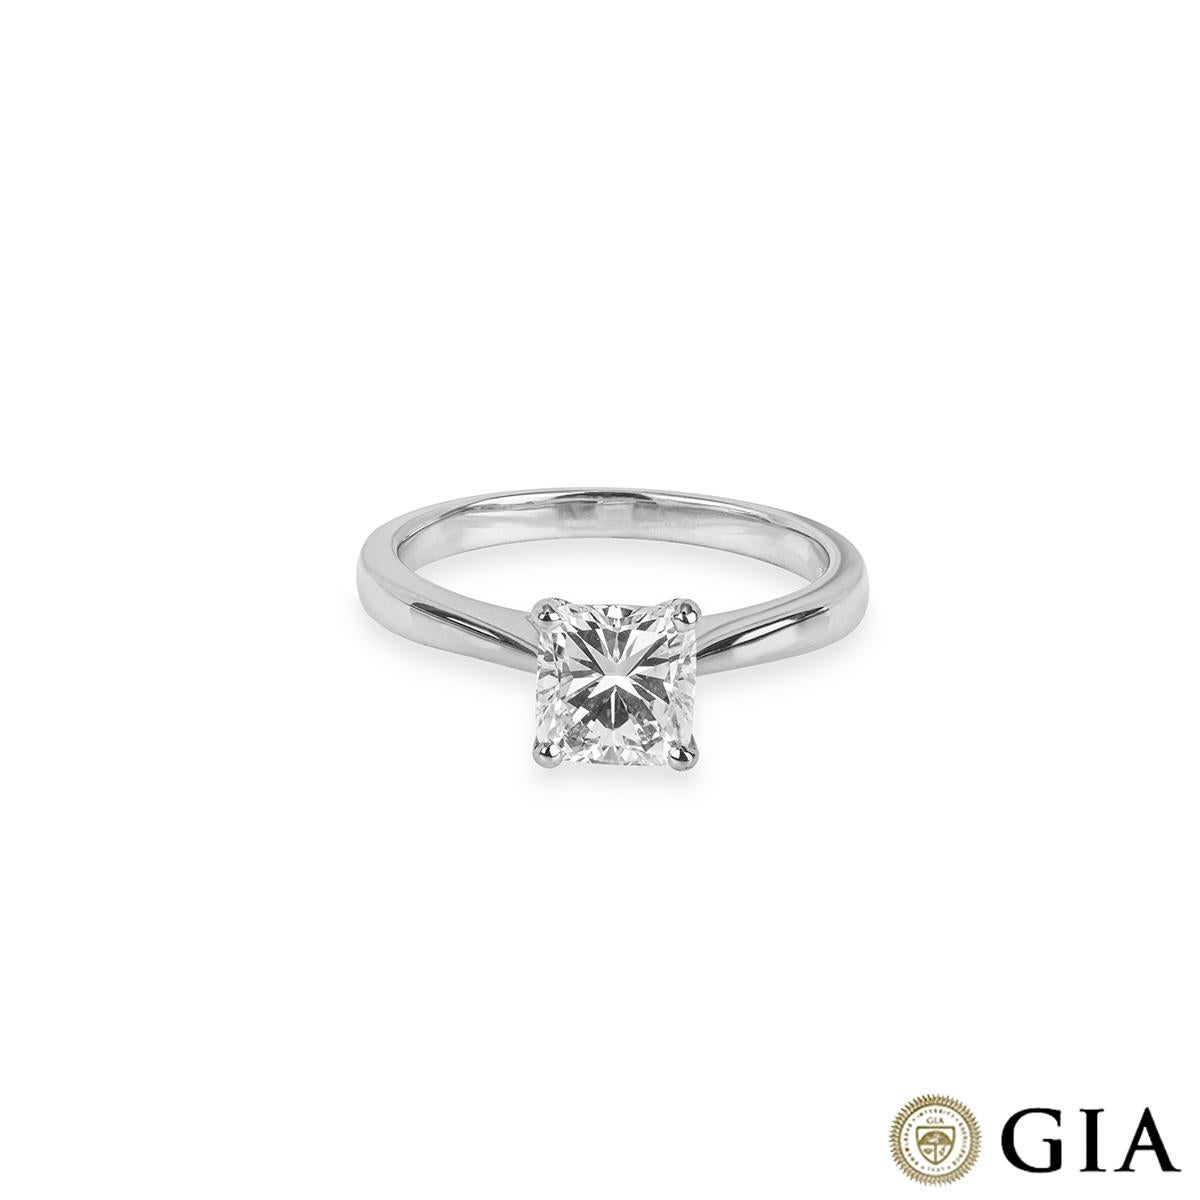 GIA Certified White Gold Cushion Cut Diamond Ring 1.14ct G/VS1 In New Condition For Sale In London, GB